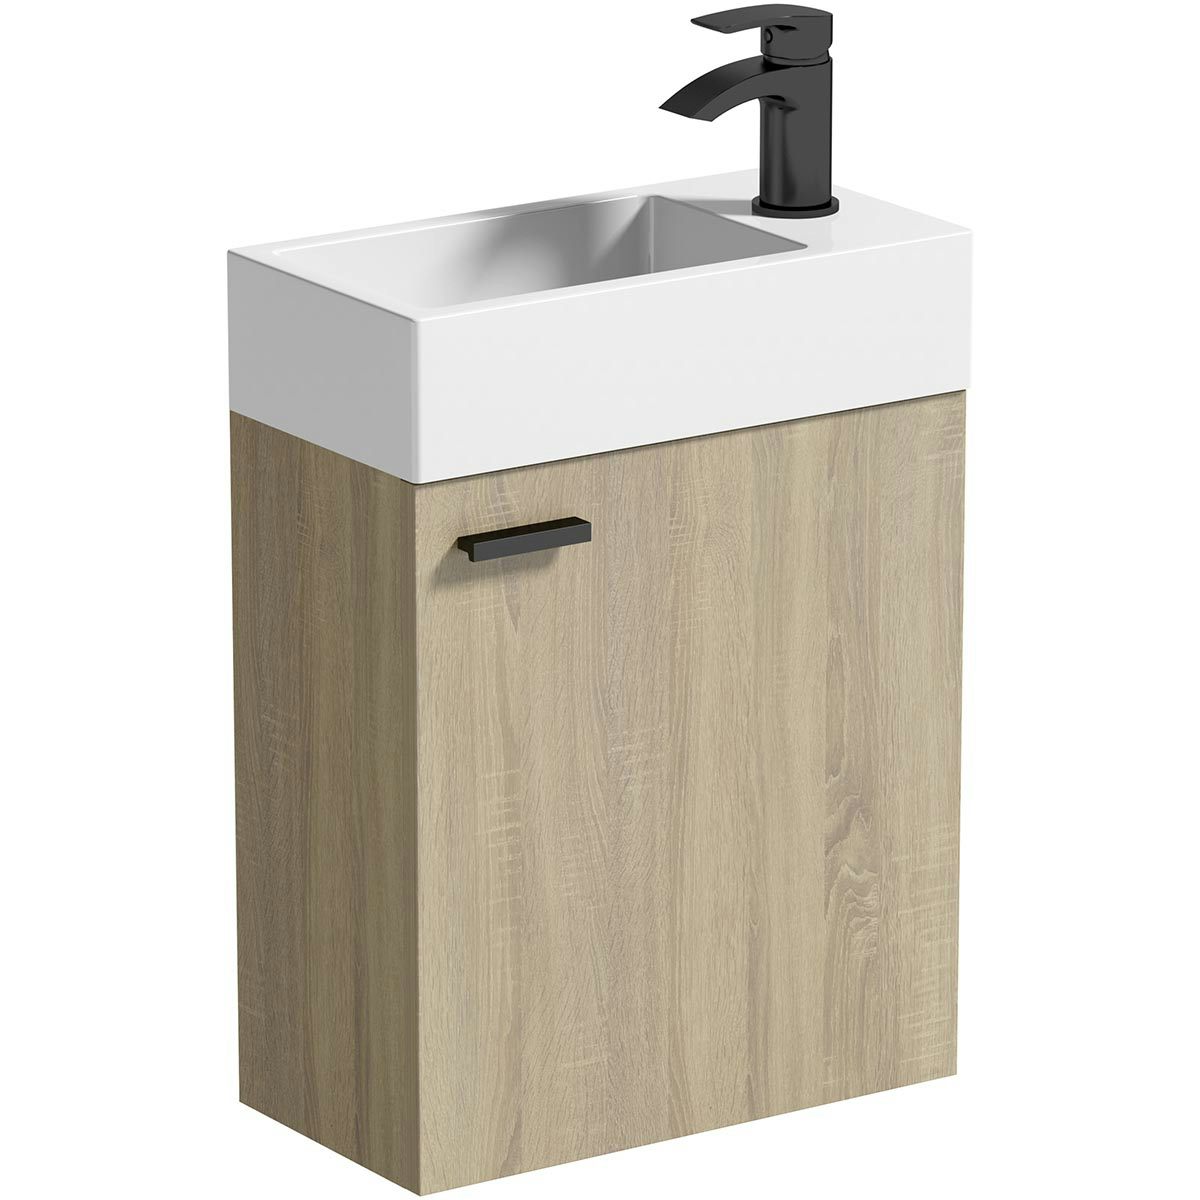 Clarity Compact oak wall hung vanity unit with black handle and basin 410mm